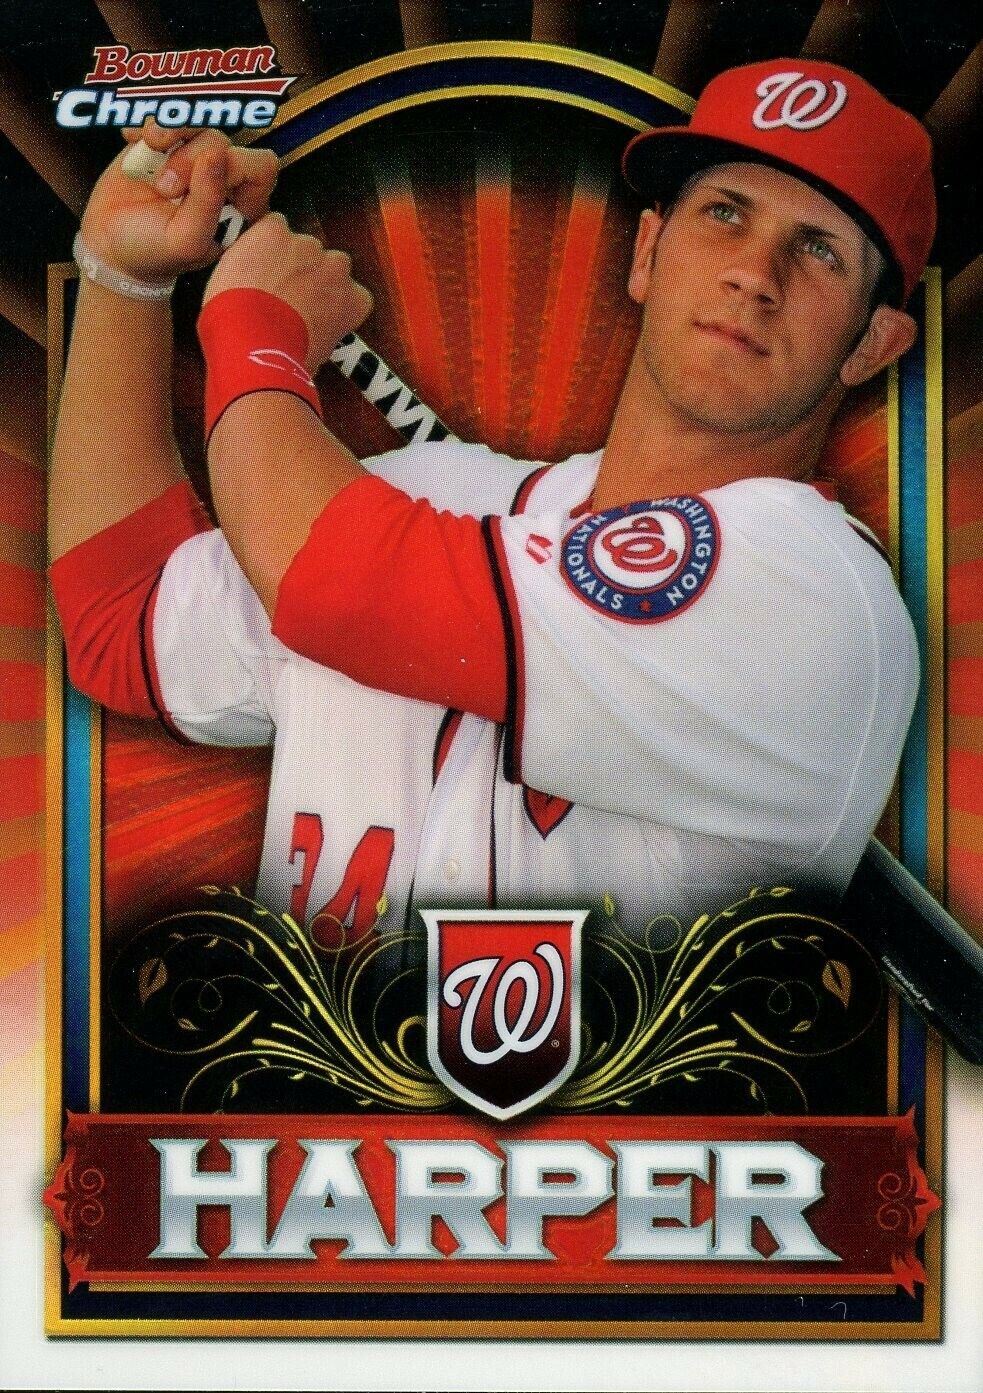 2011 Topps Bowman Chrome Exclusives #BCE1 Bryce Harper Red Refractor Prospect